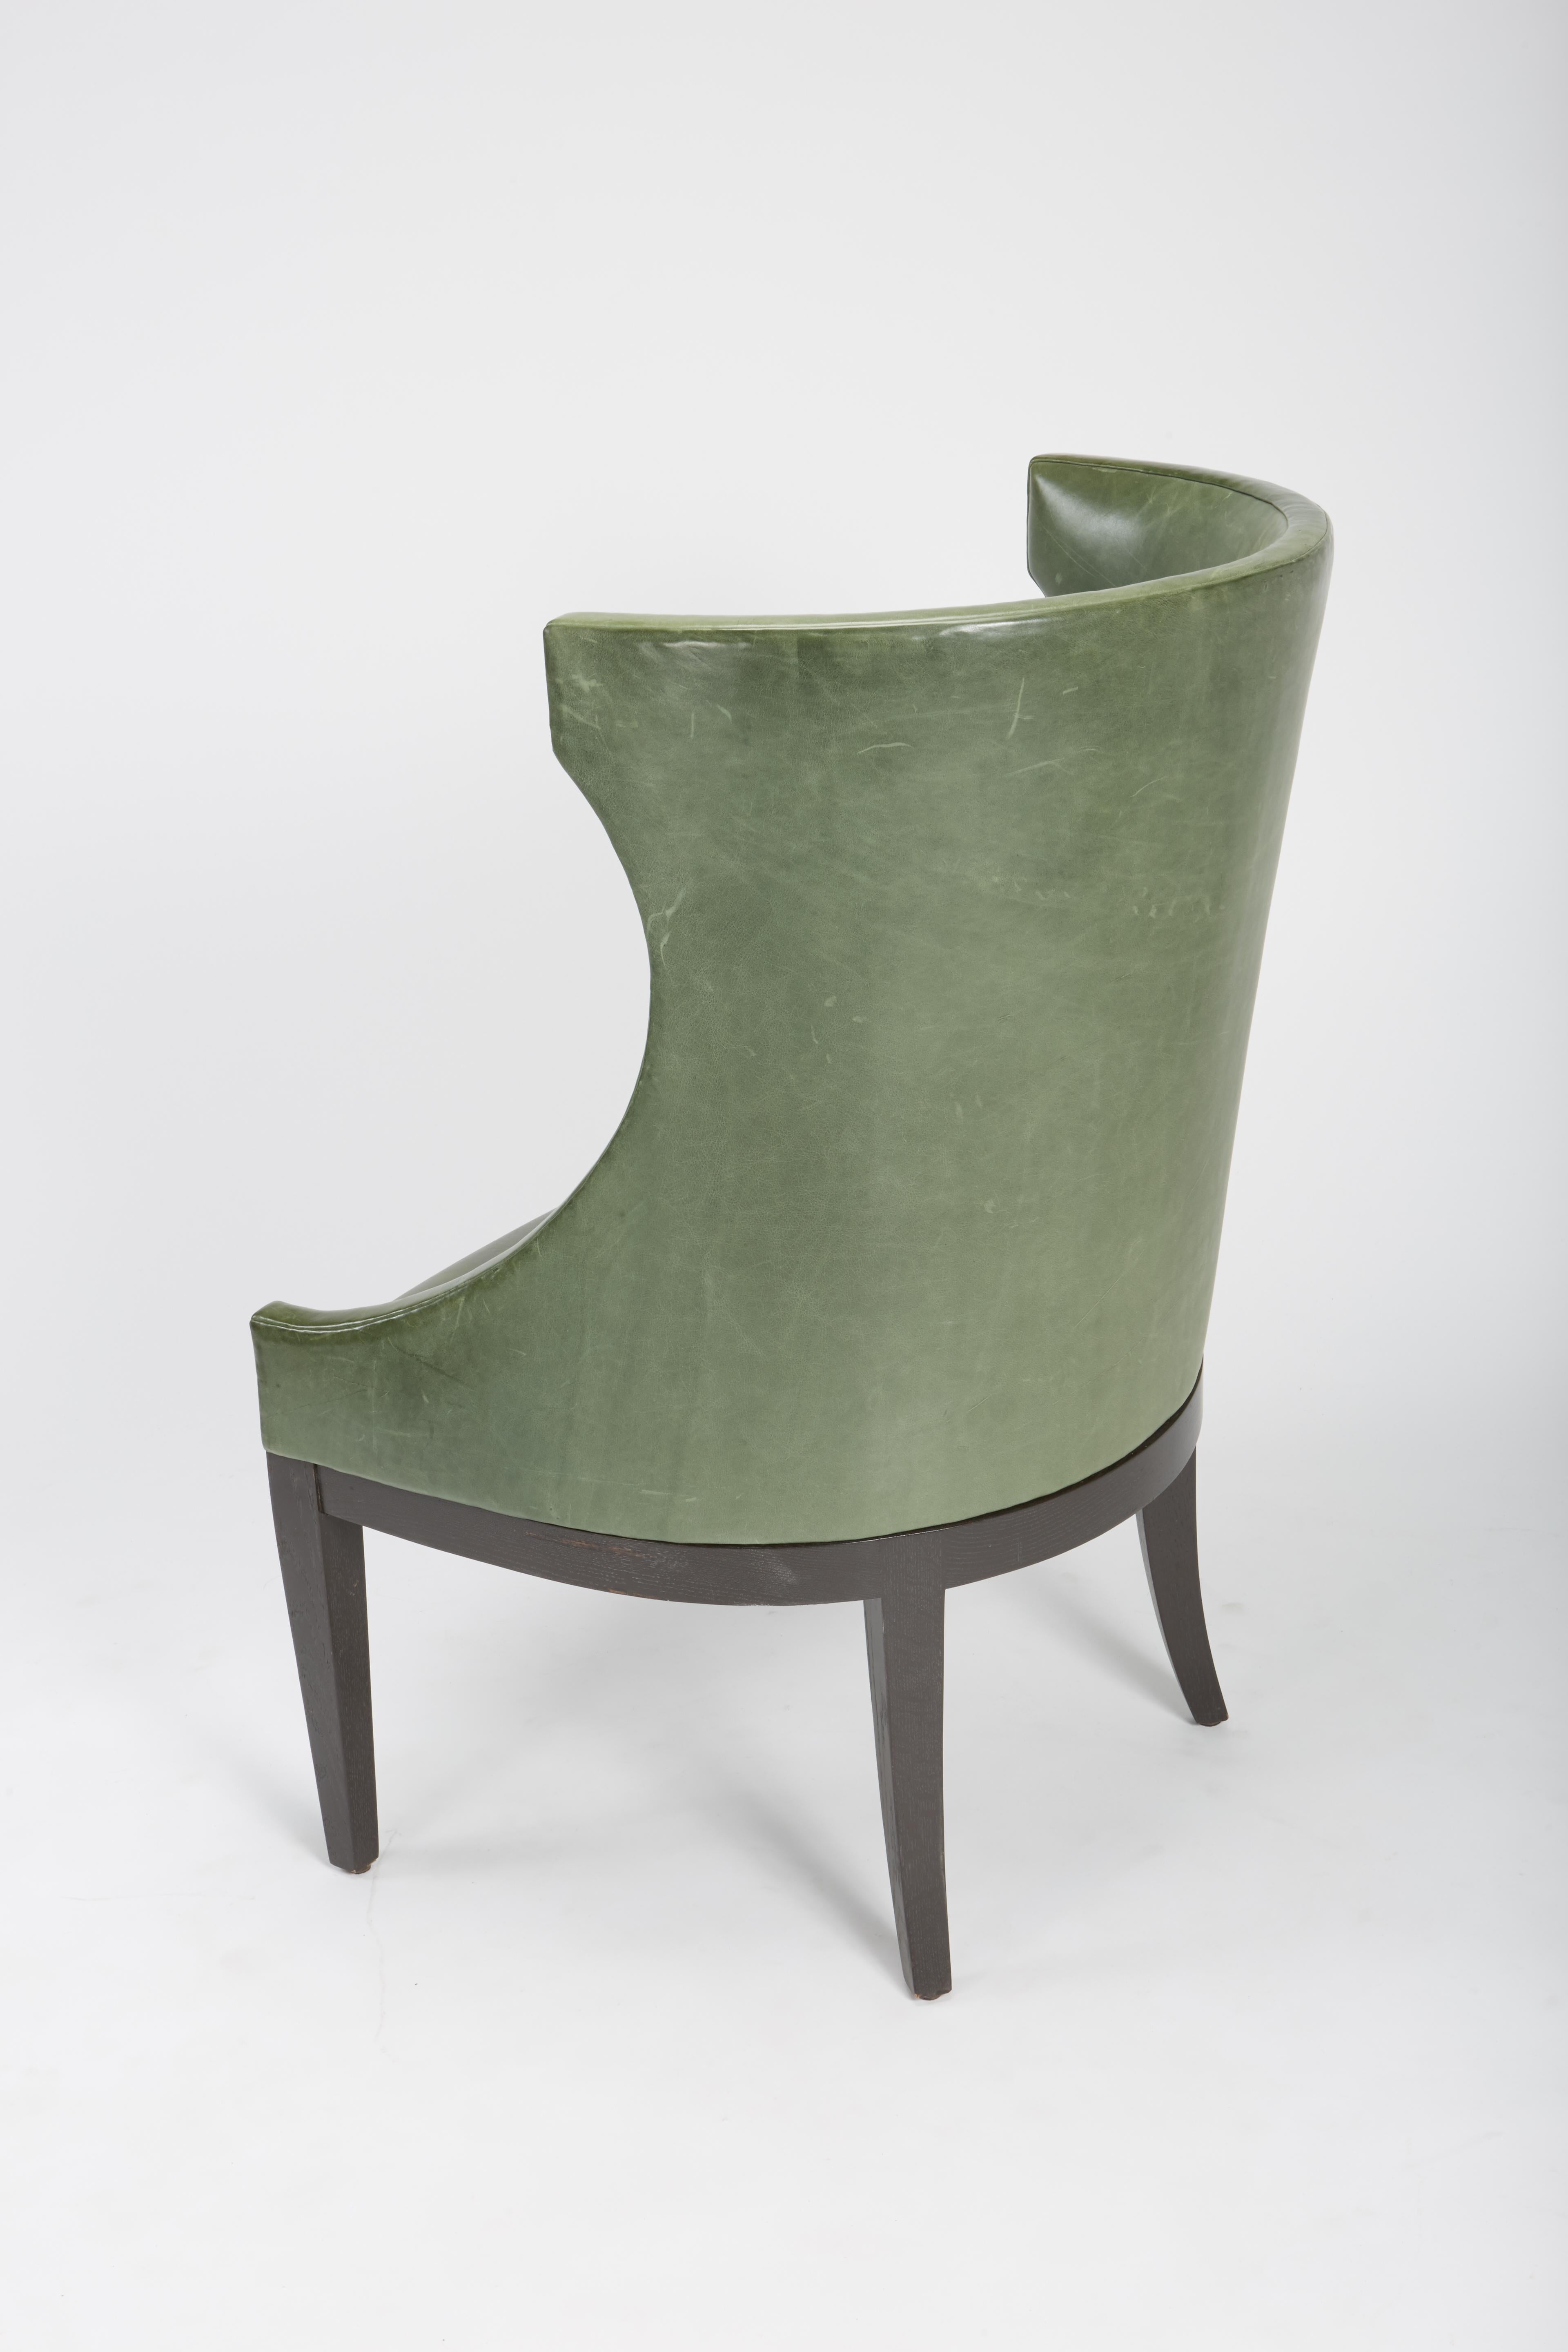 Dessin Fournir Classical Modern High Wingback with Green Leather Armchairs 6